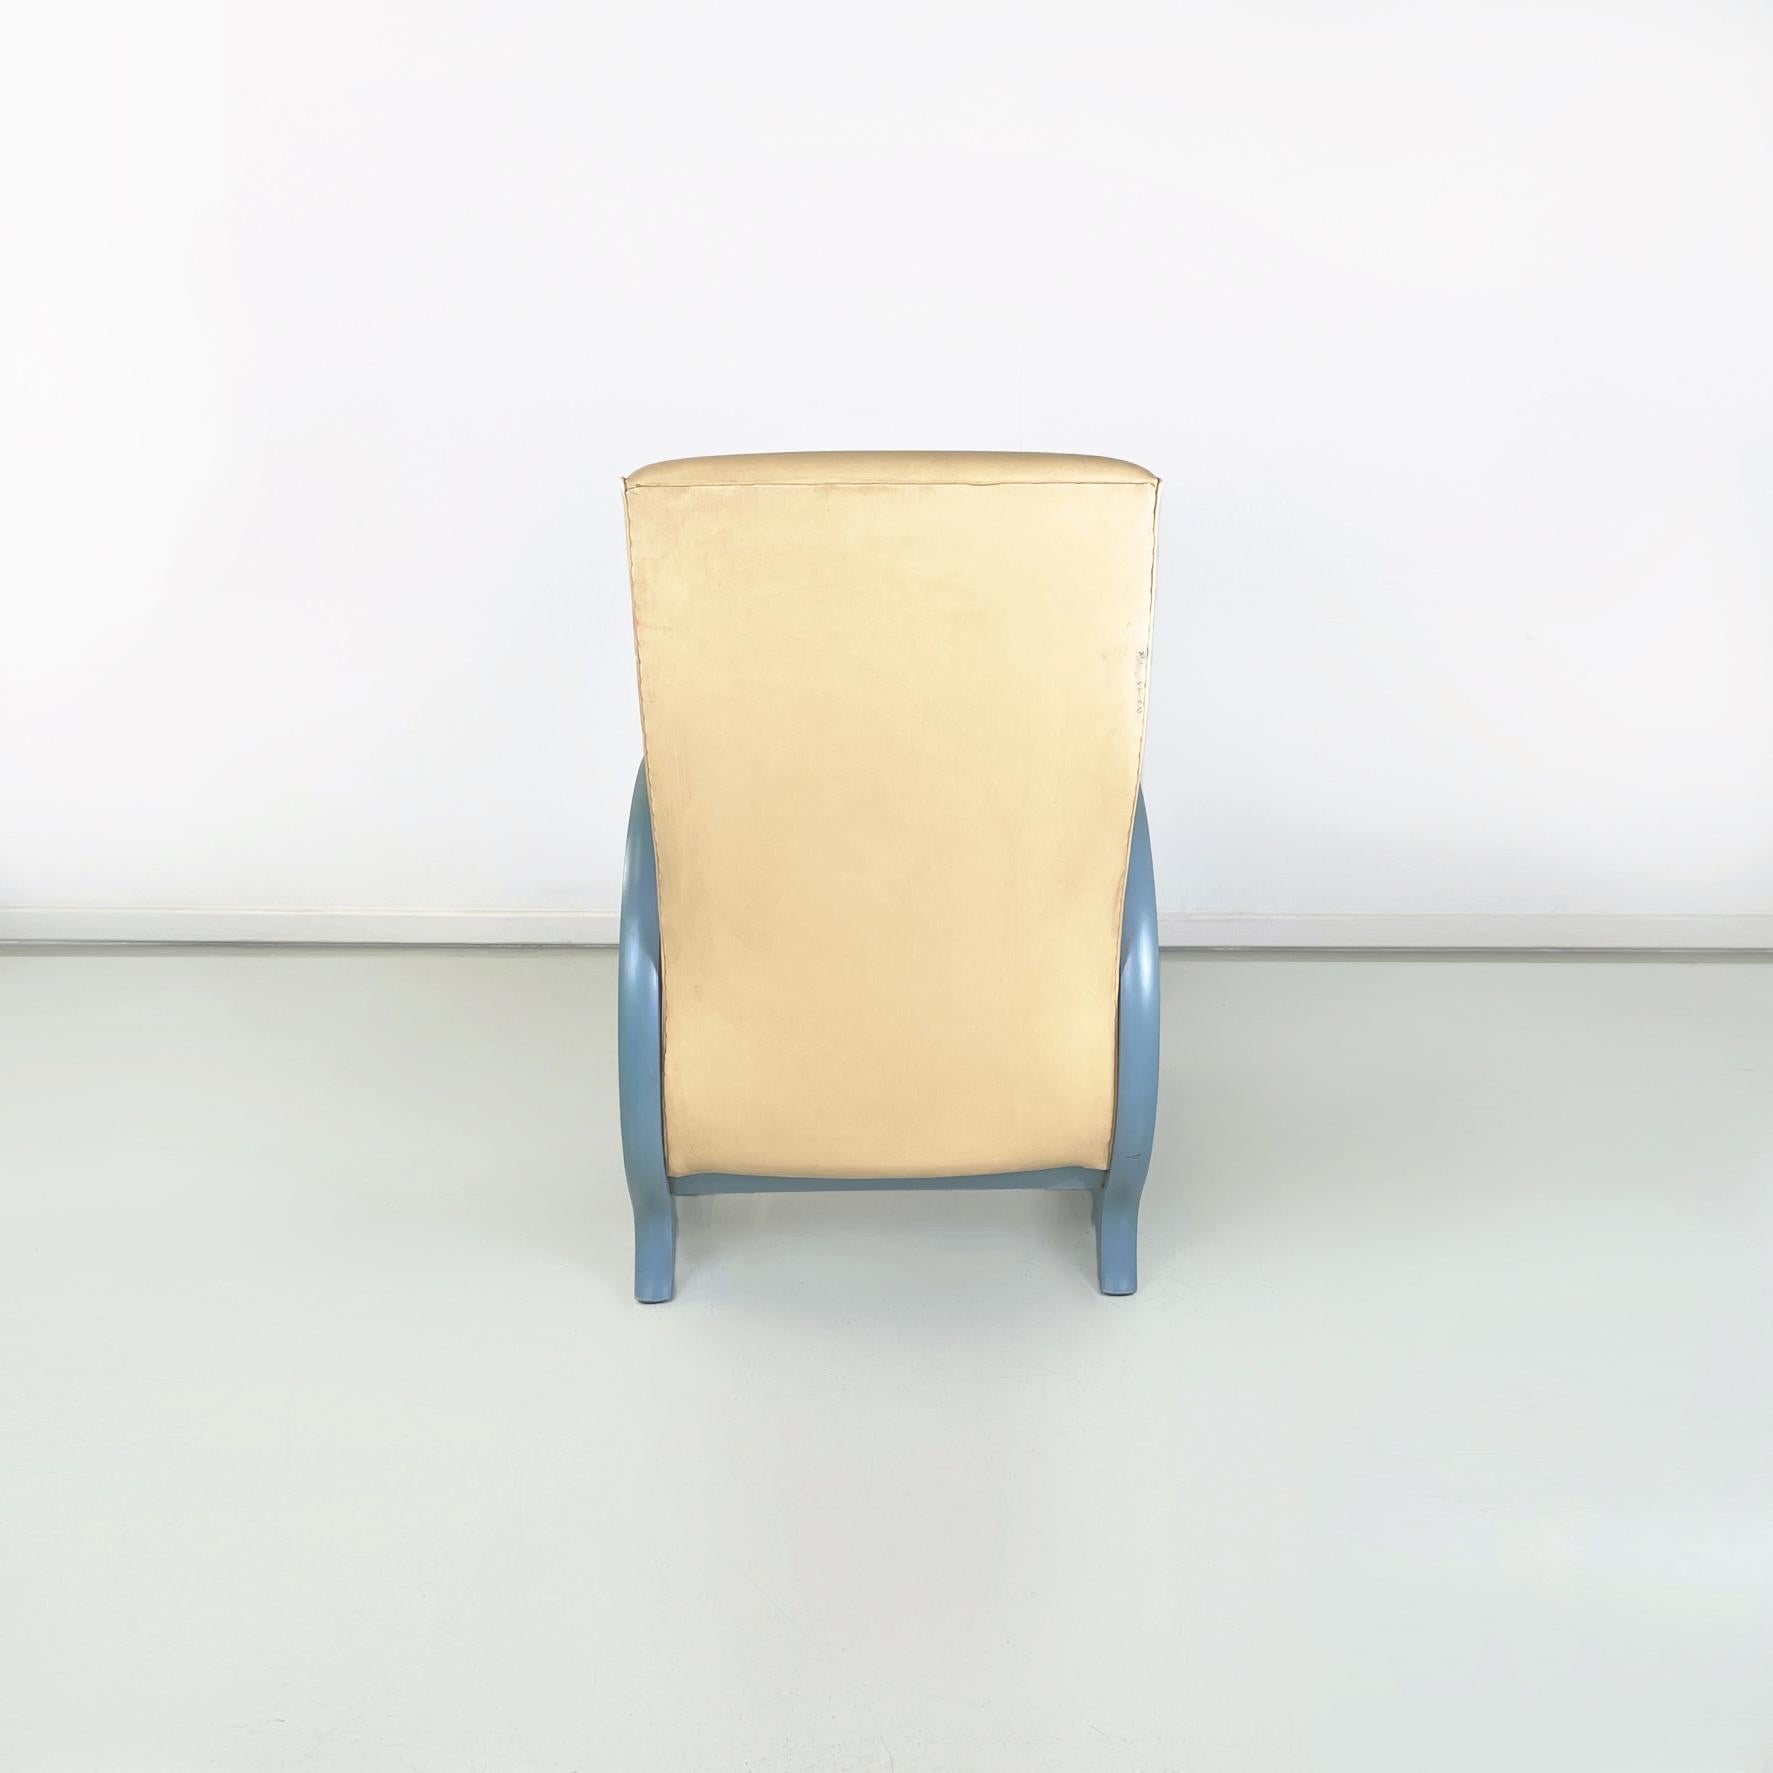 Italian Modern Armchair in Beige Leather and Light Blue Wood, 1980s For Sale 1